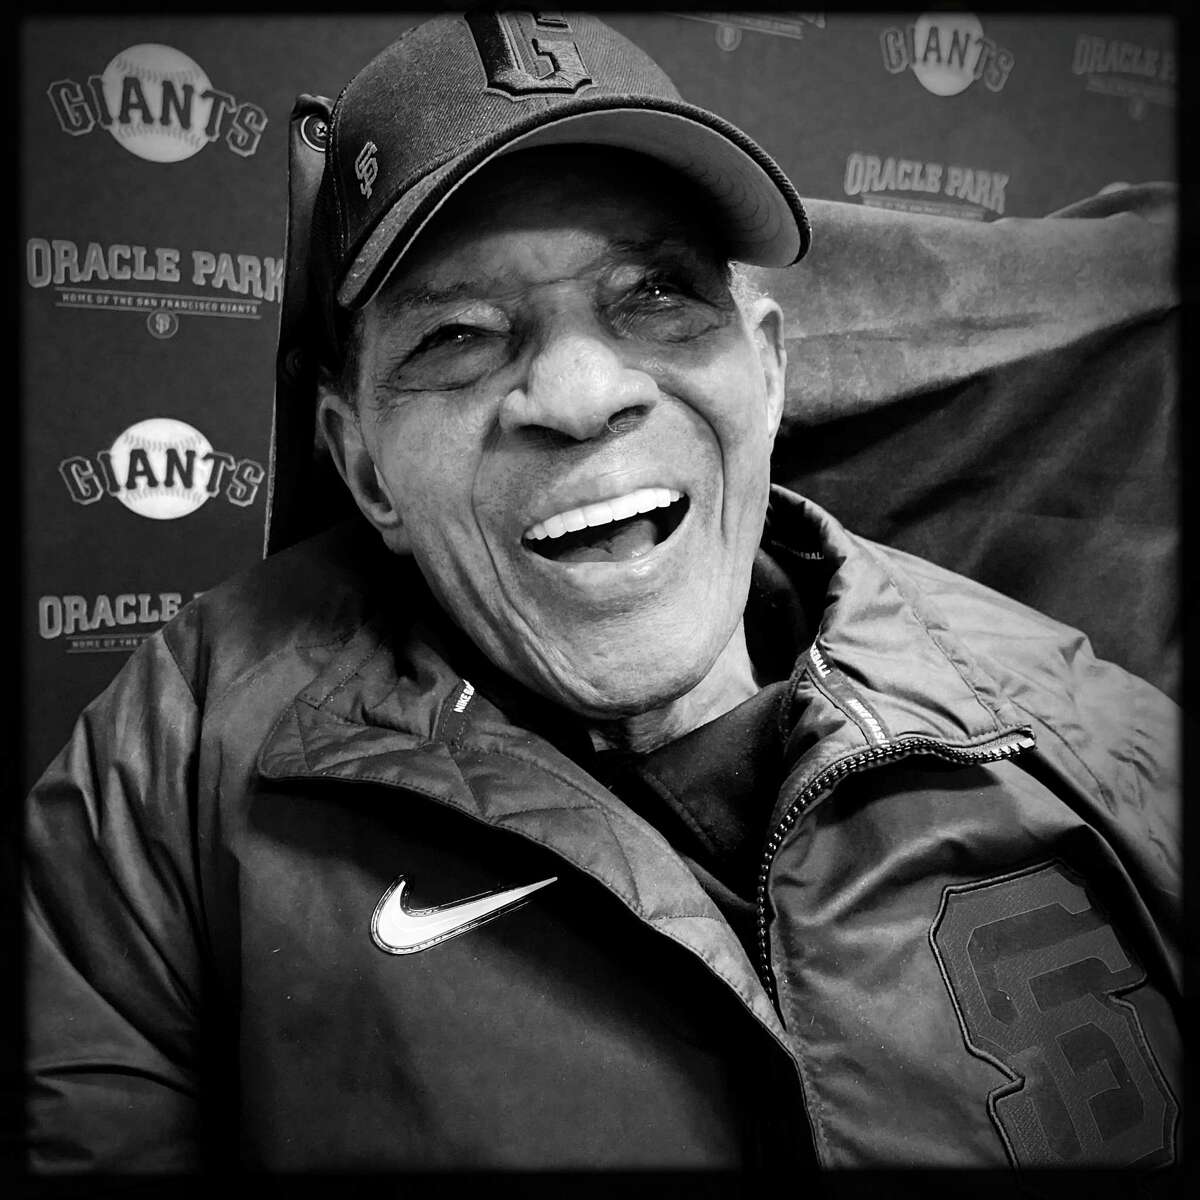 As Willie Mays turns 92, SF Giants fans, players share memories